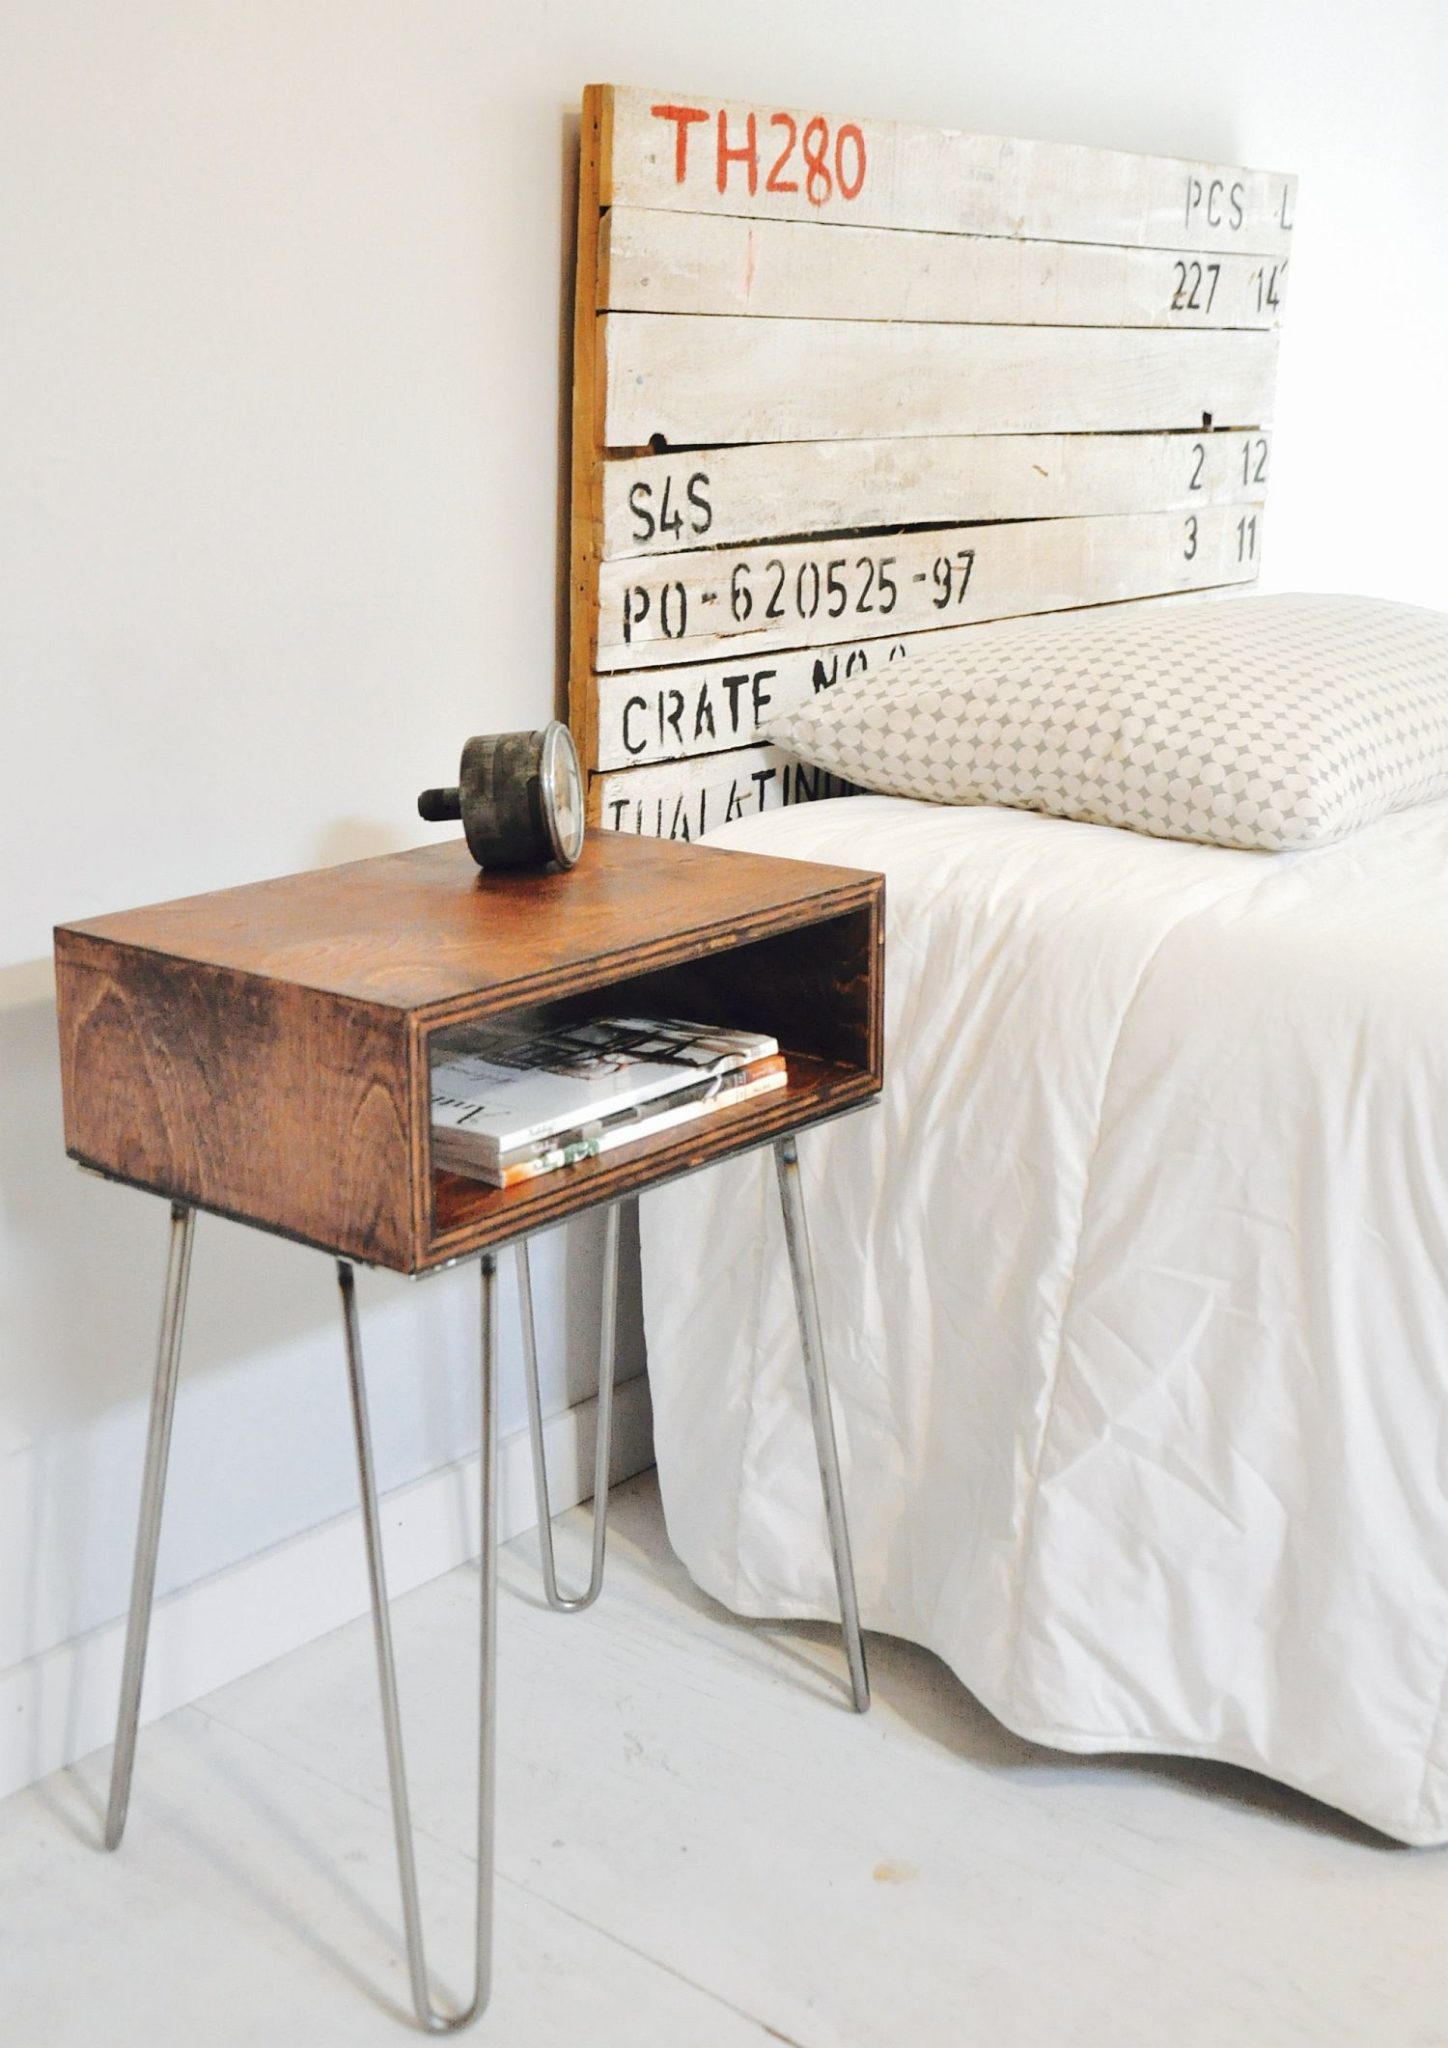 Simple and industrial box-style DIY bedside table